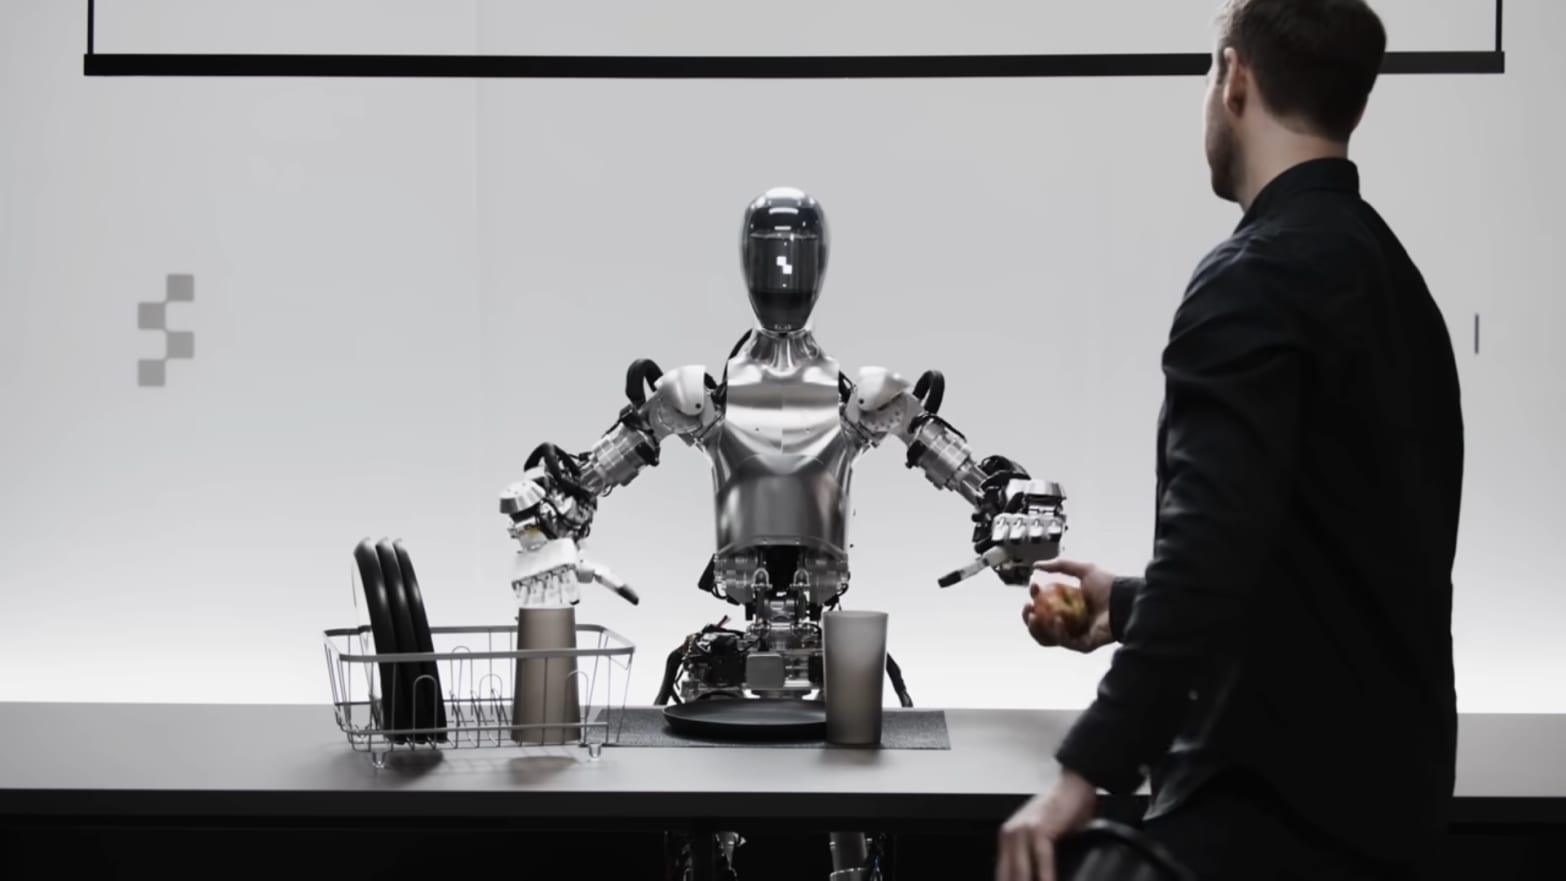 A robot sits at a table with a human standing in front of it